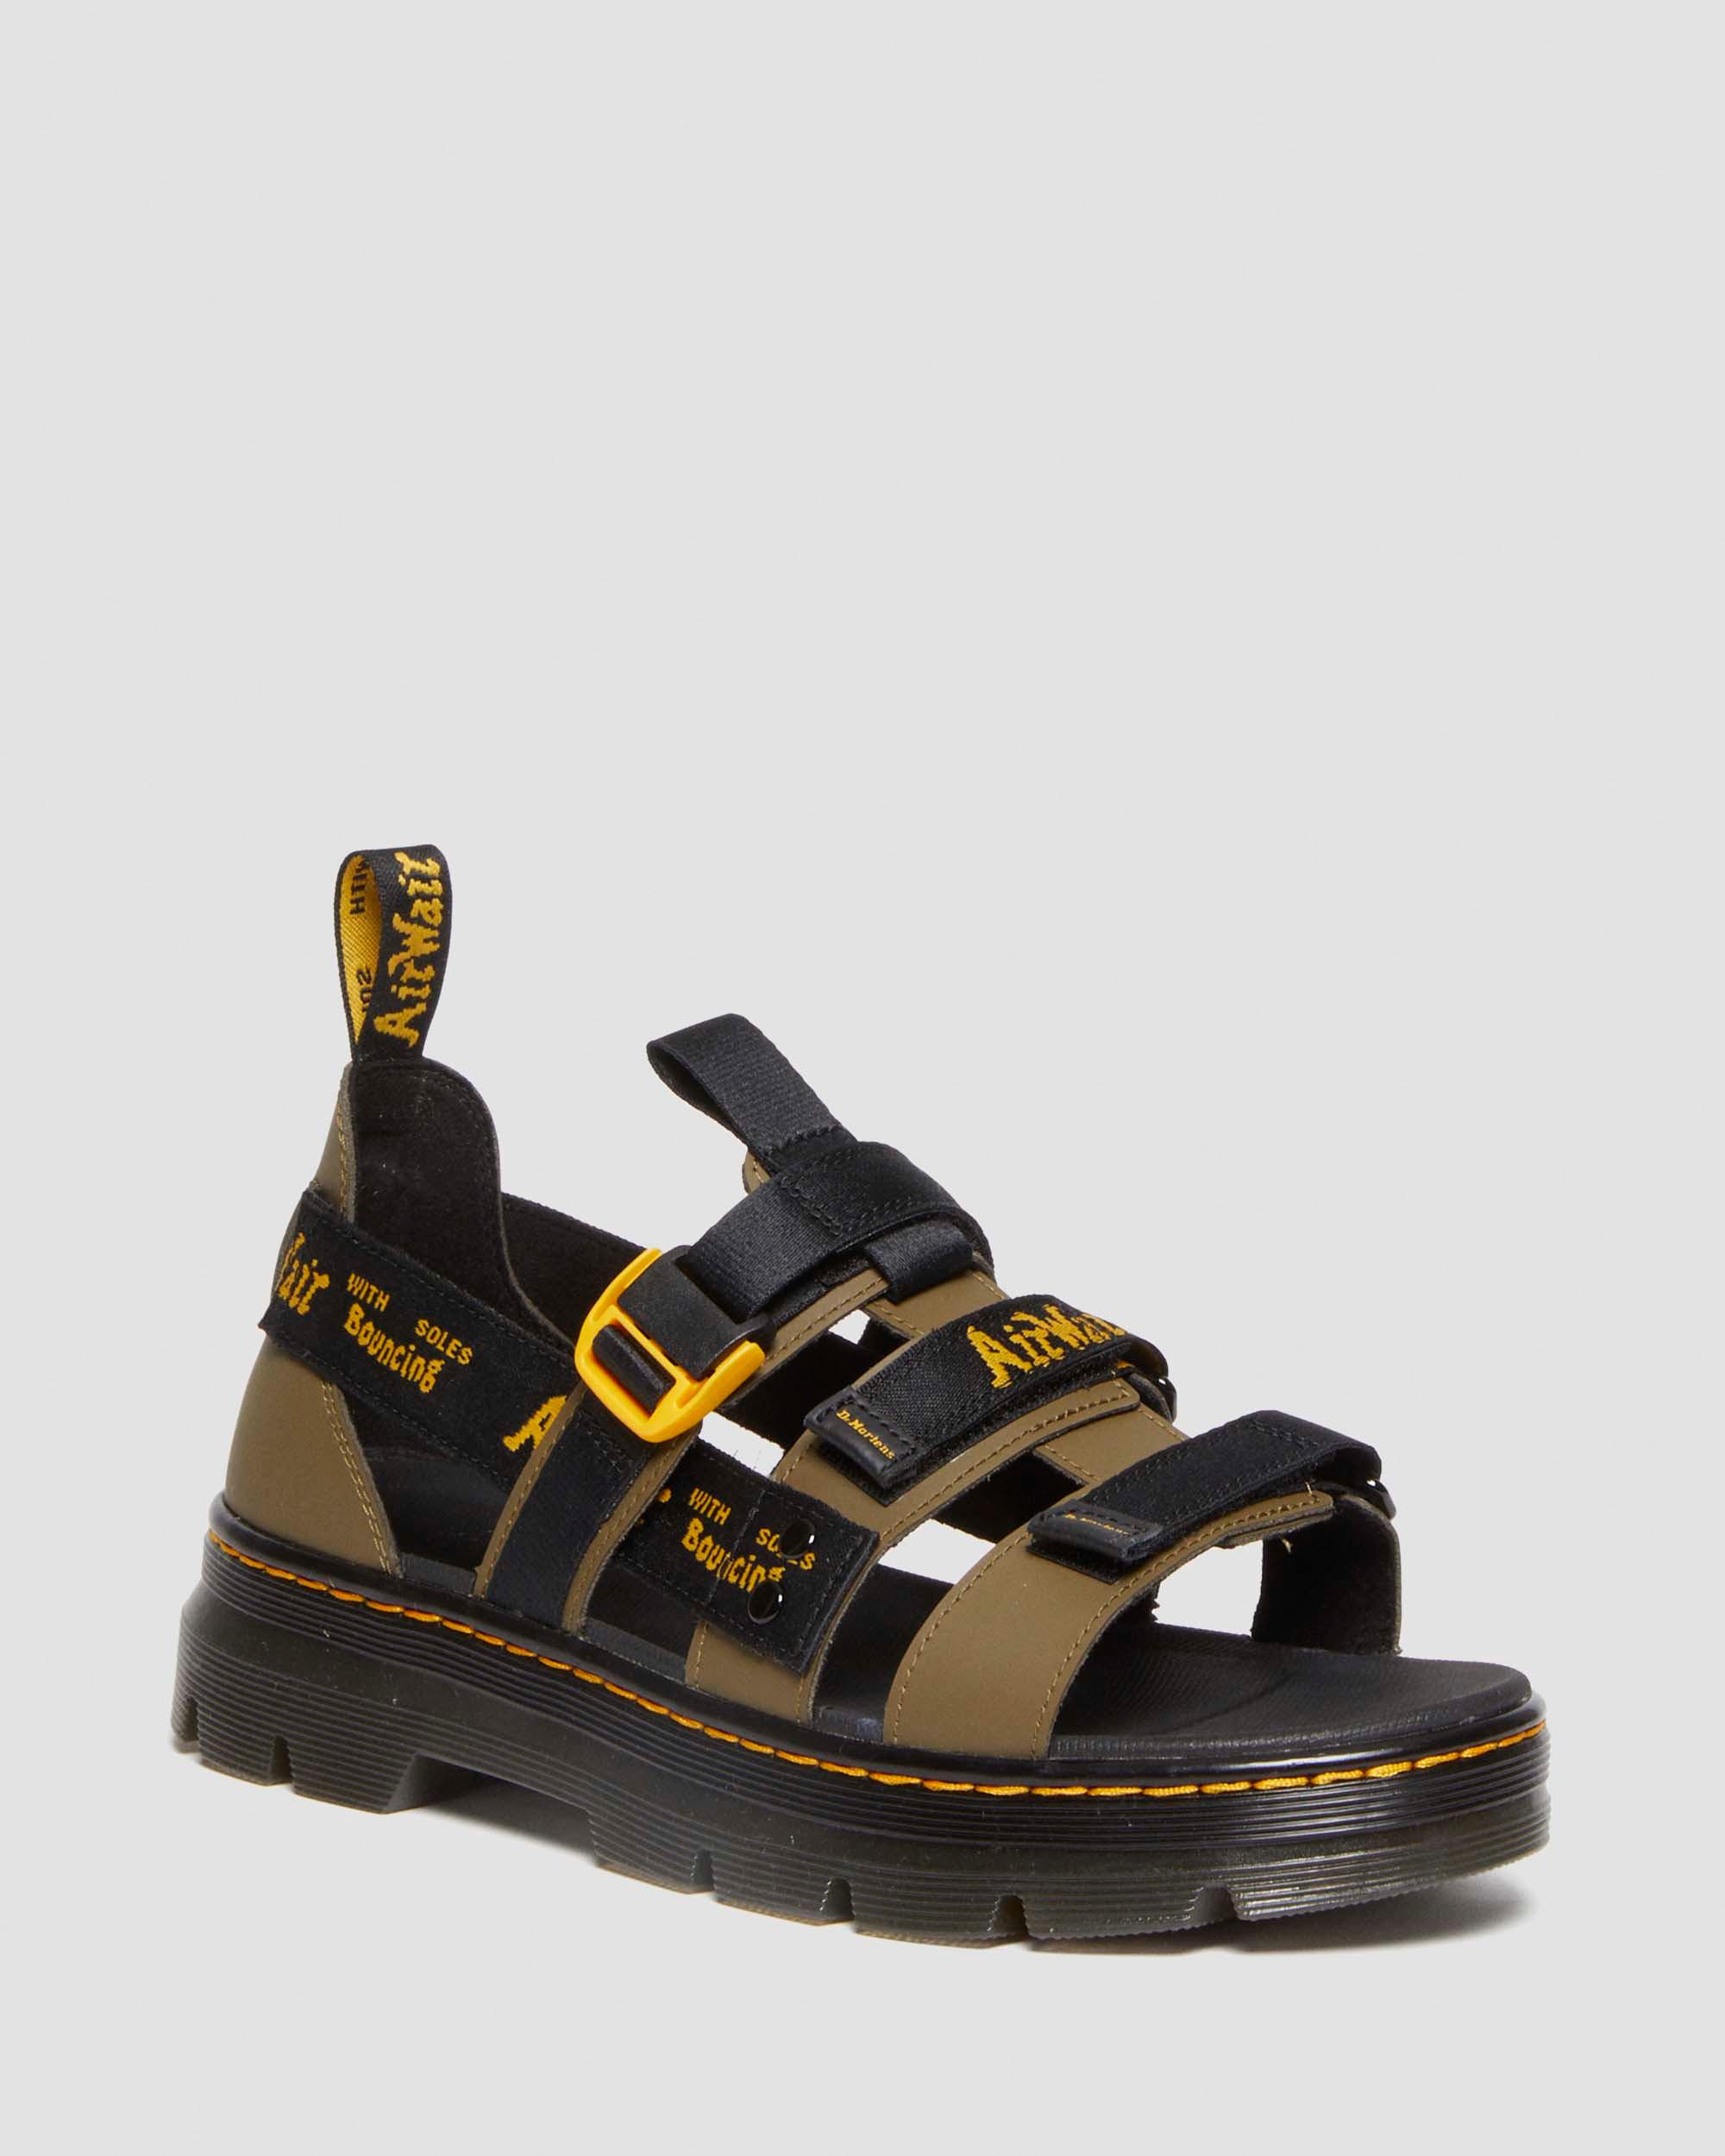 DR. MARTENS' PEARSON II LEATHER LOGO STRAP SANDALS